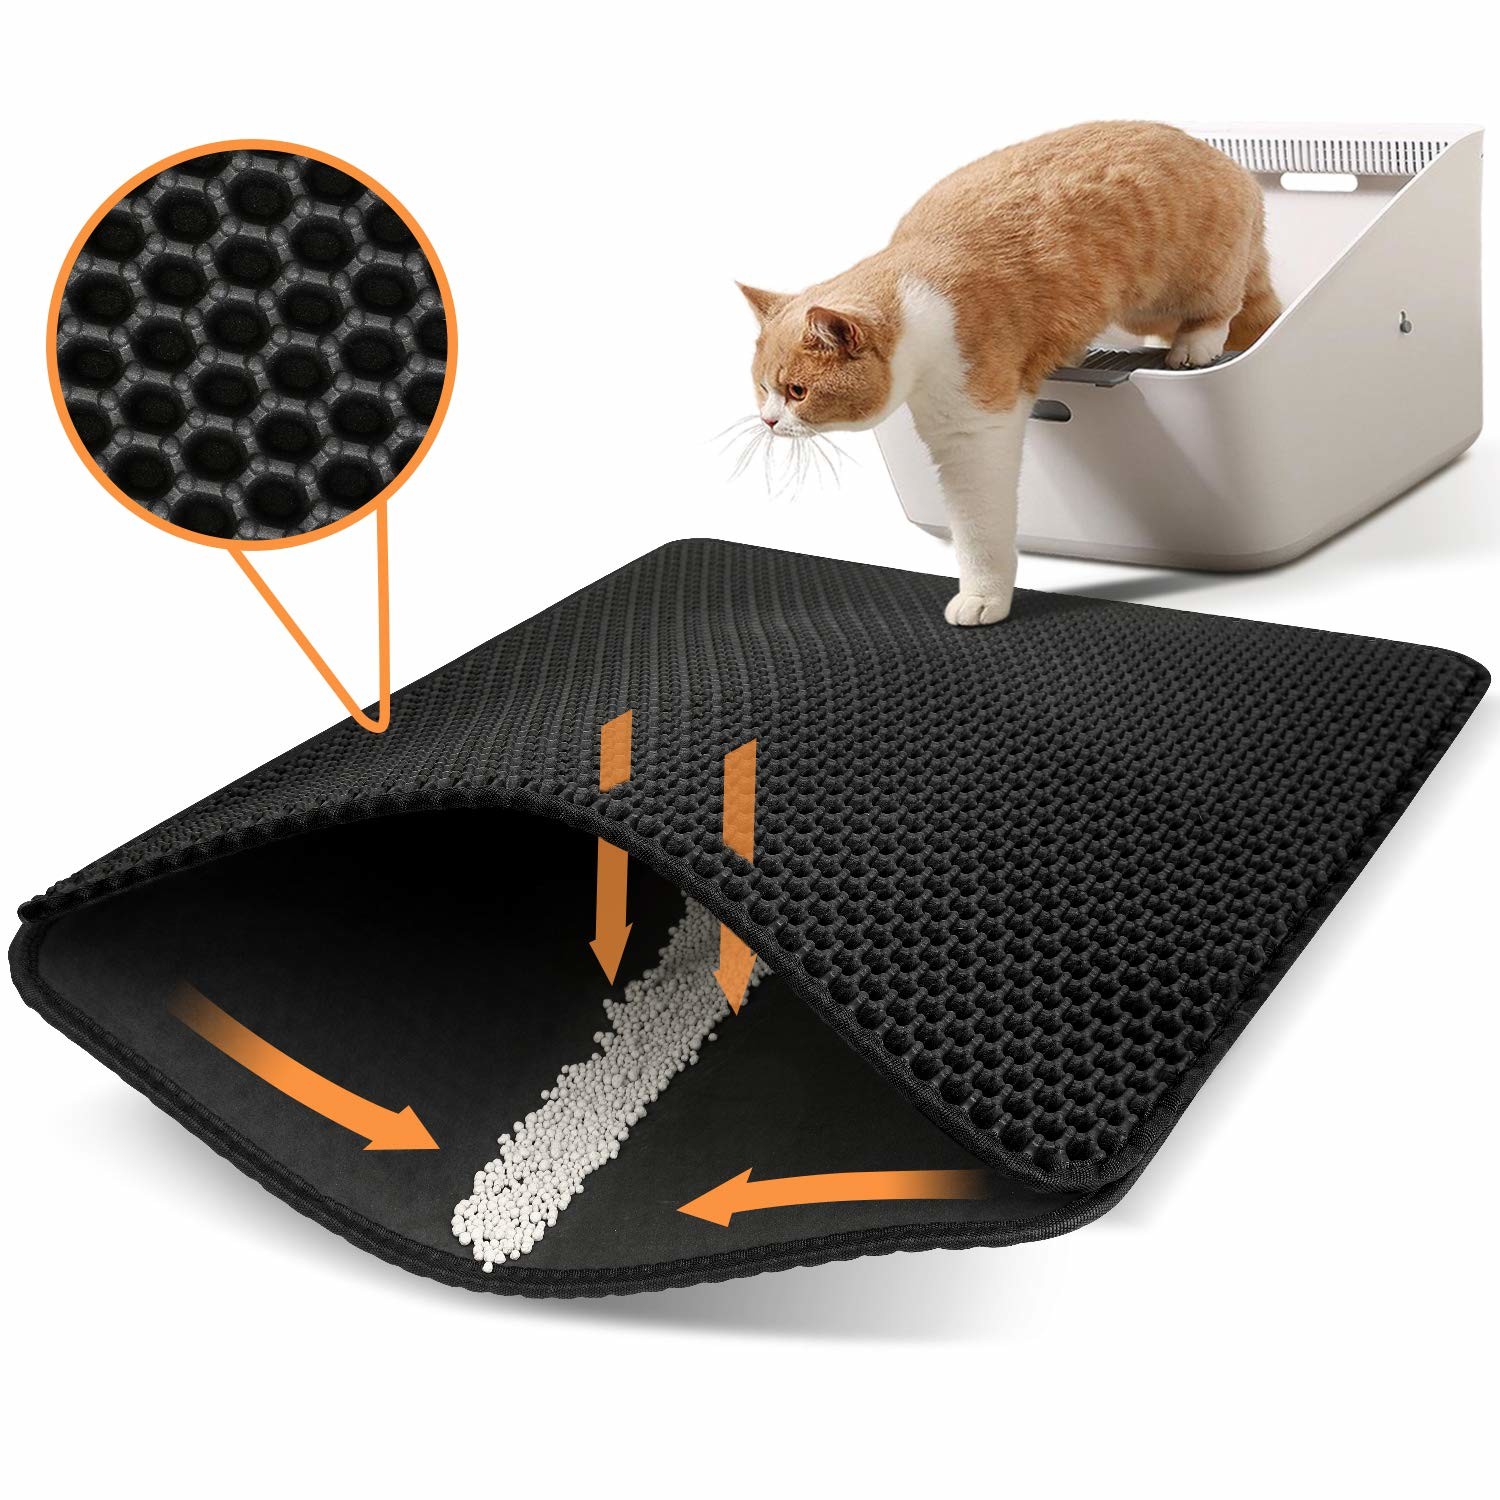  SGS 75cm Machine Washable Cat Litter Mat Honeycomb Chewy Manufactures